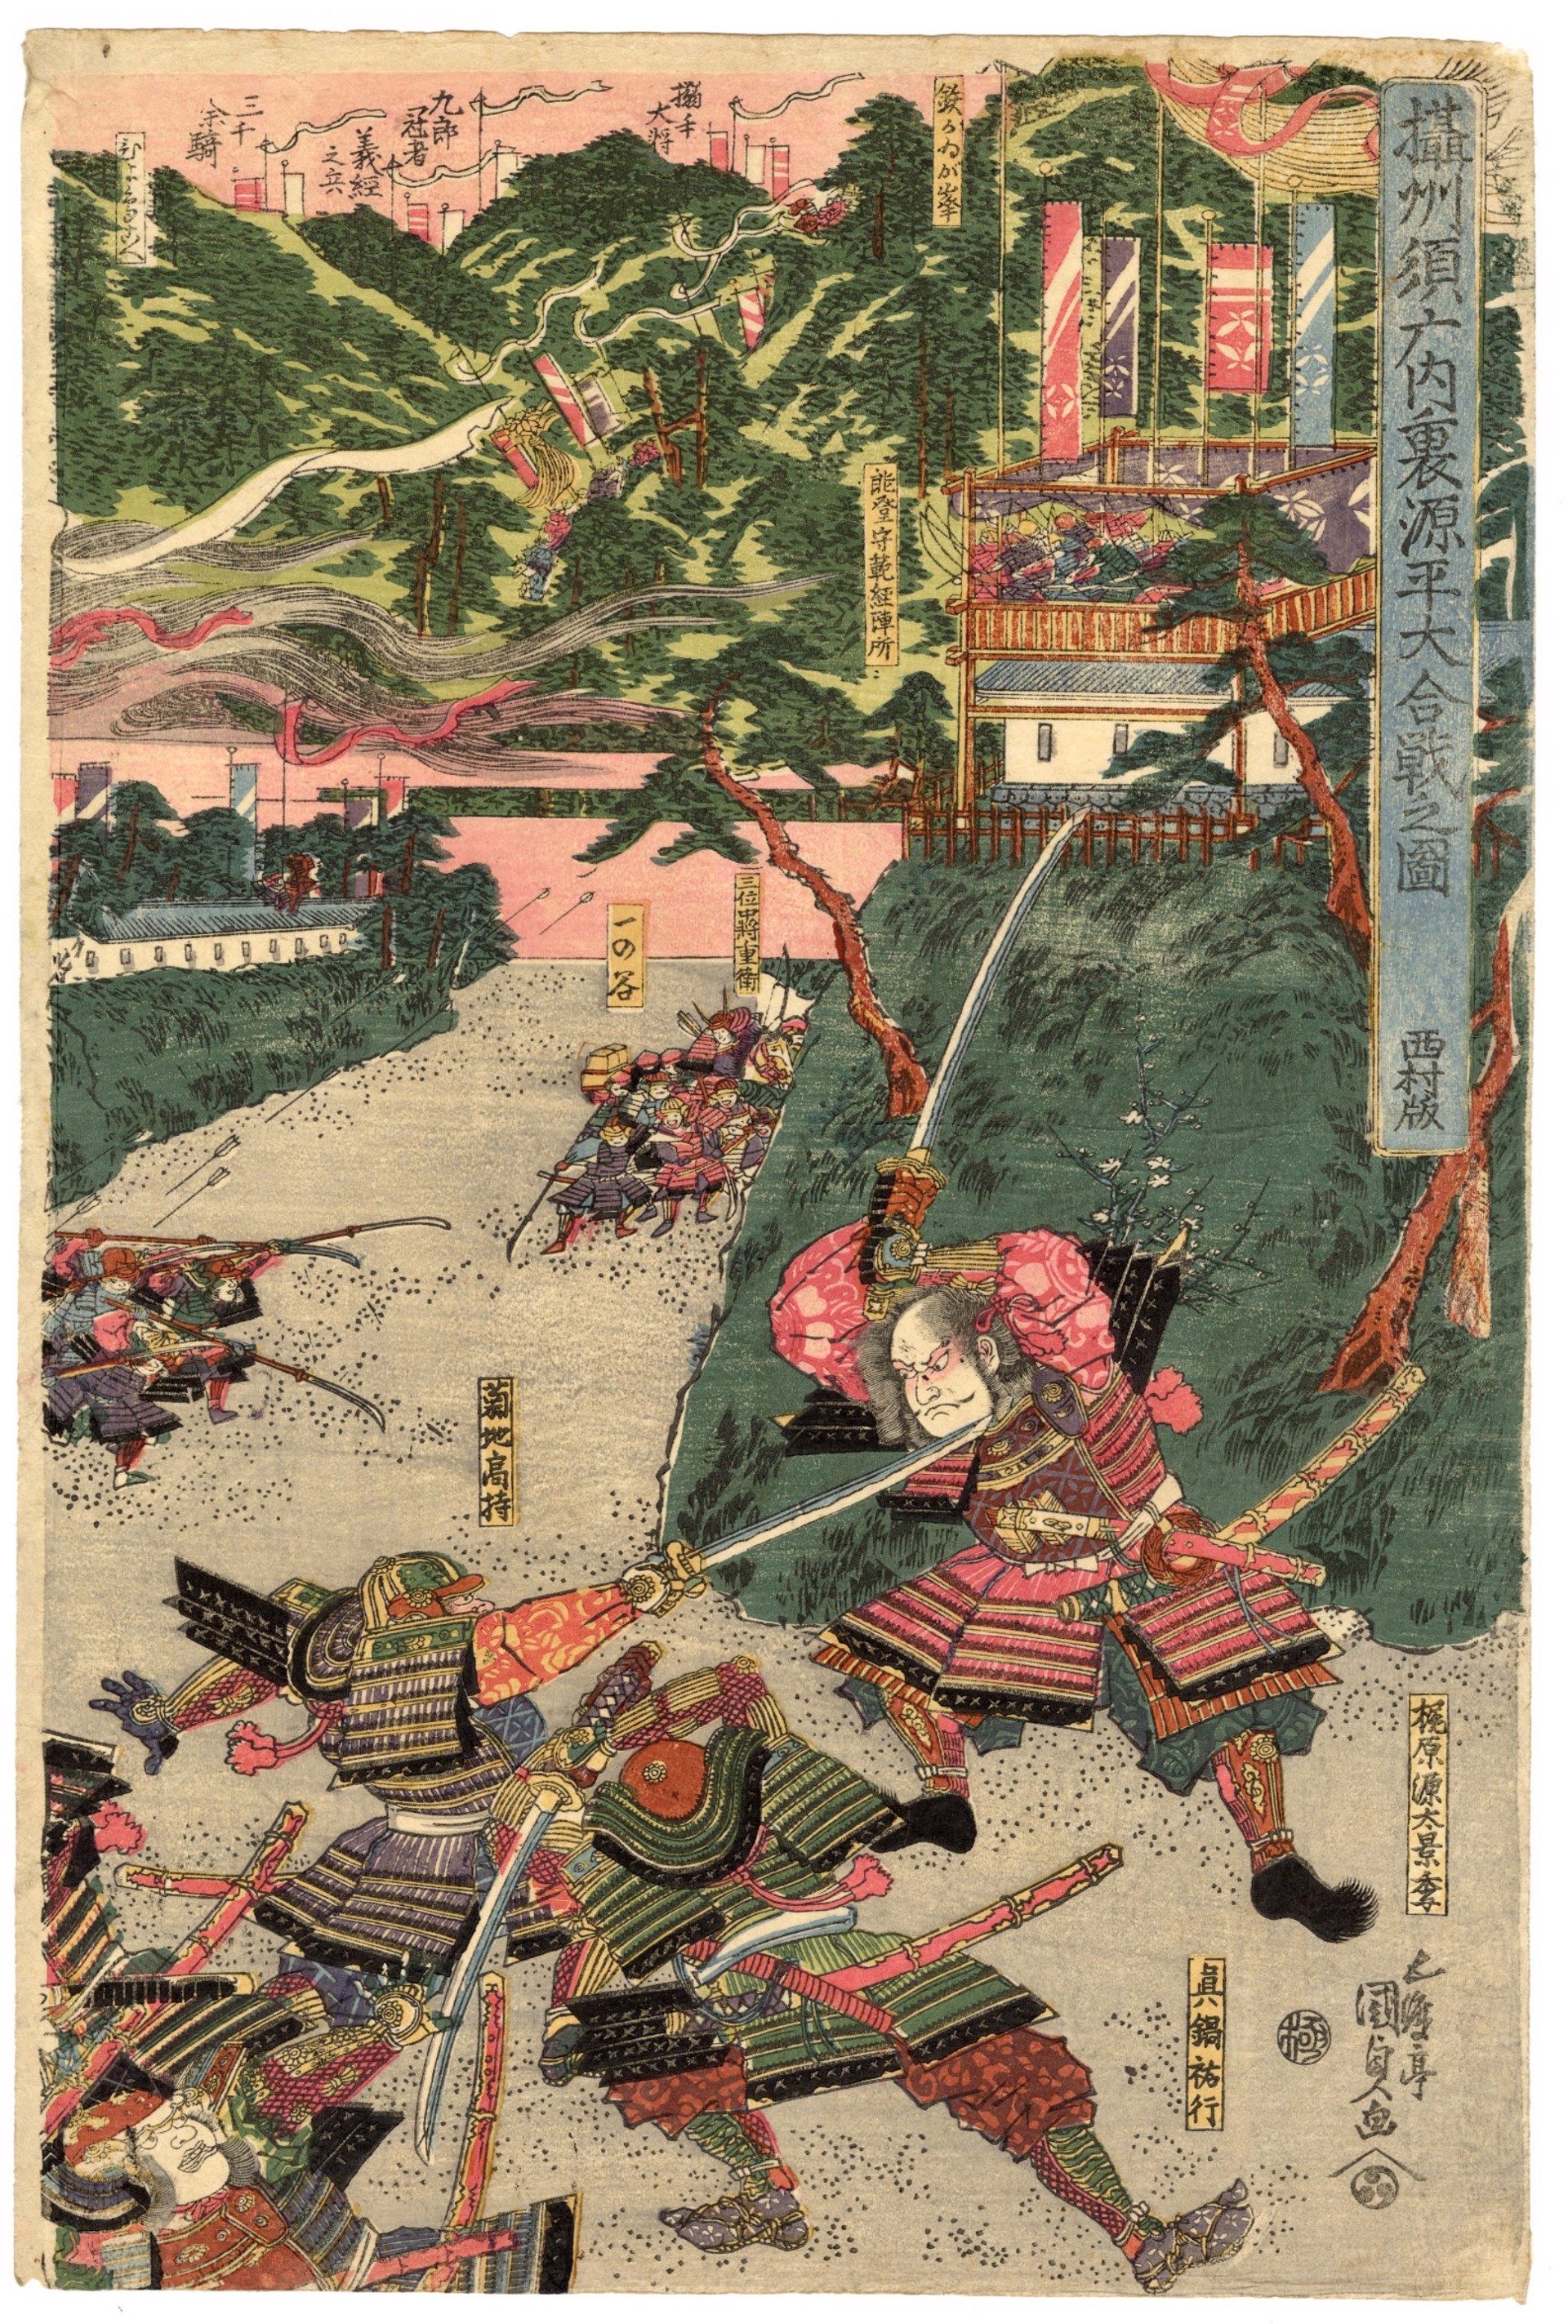 The Great Battle of the Genji (Minamoto) and the Heike (Taira) at the Imperial Palace in Suma Province During the Genpei Wars by Kunisada